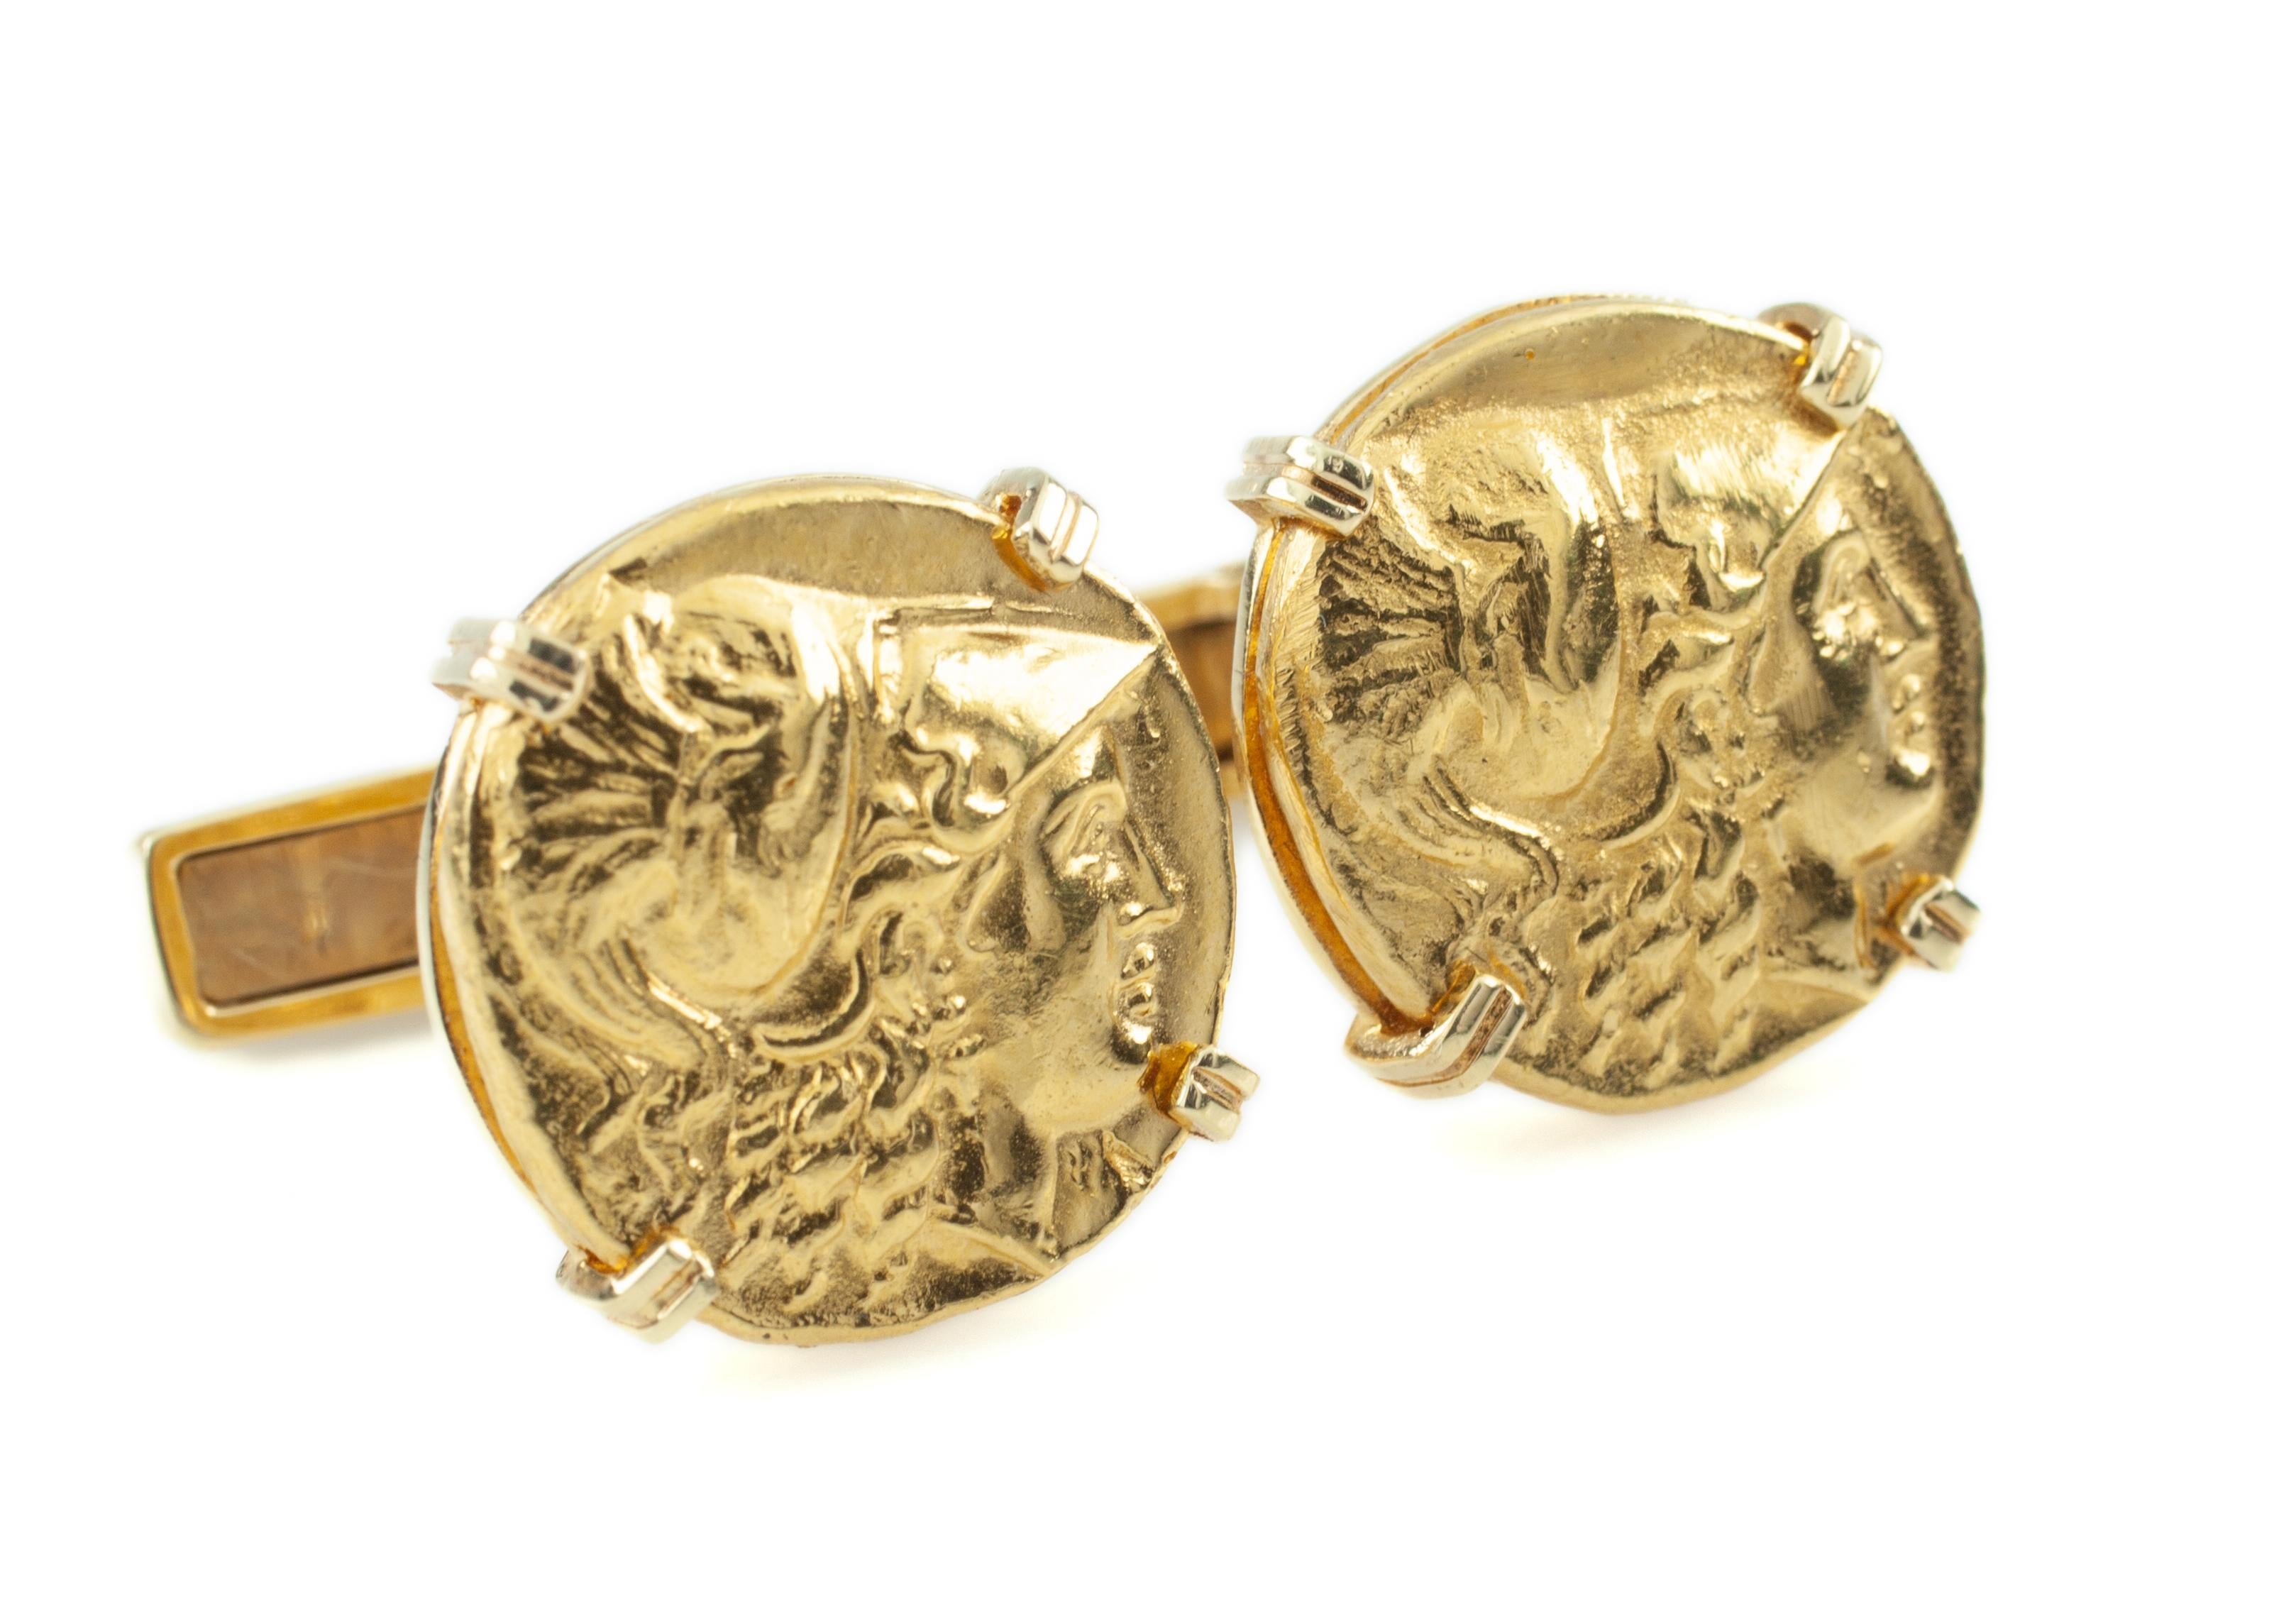 Gorgeous Cufflinks by Emis
18k Yellow Gold
Feature Restrikes of Ancient Coin Featuring Alexander the Great
Diameter of Coins = Approximately 16 mm
Total Mass = 24.5 grams